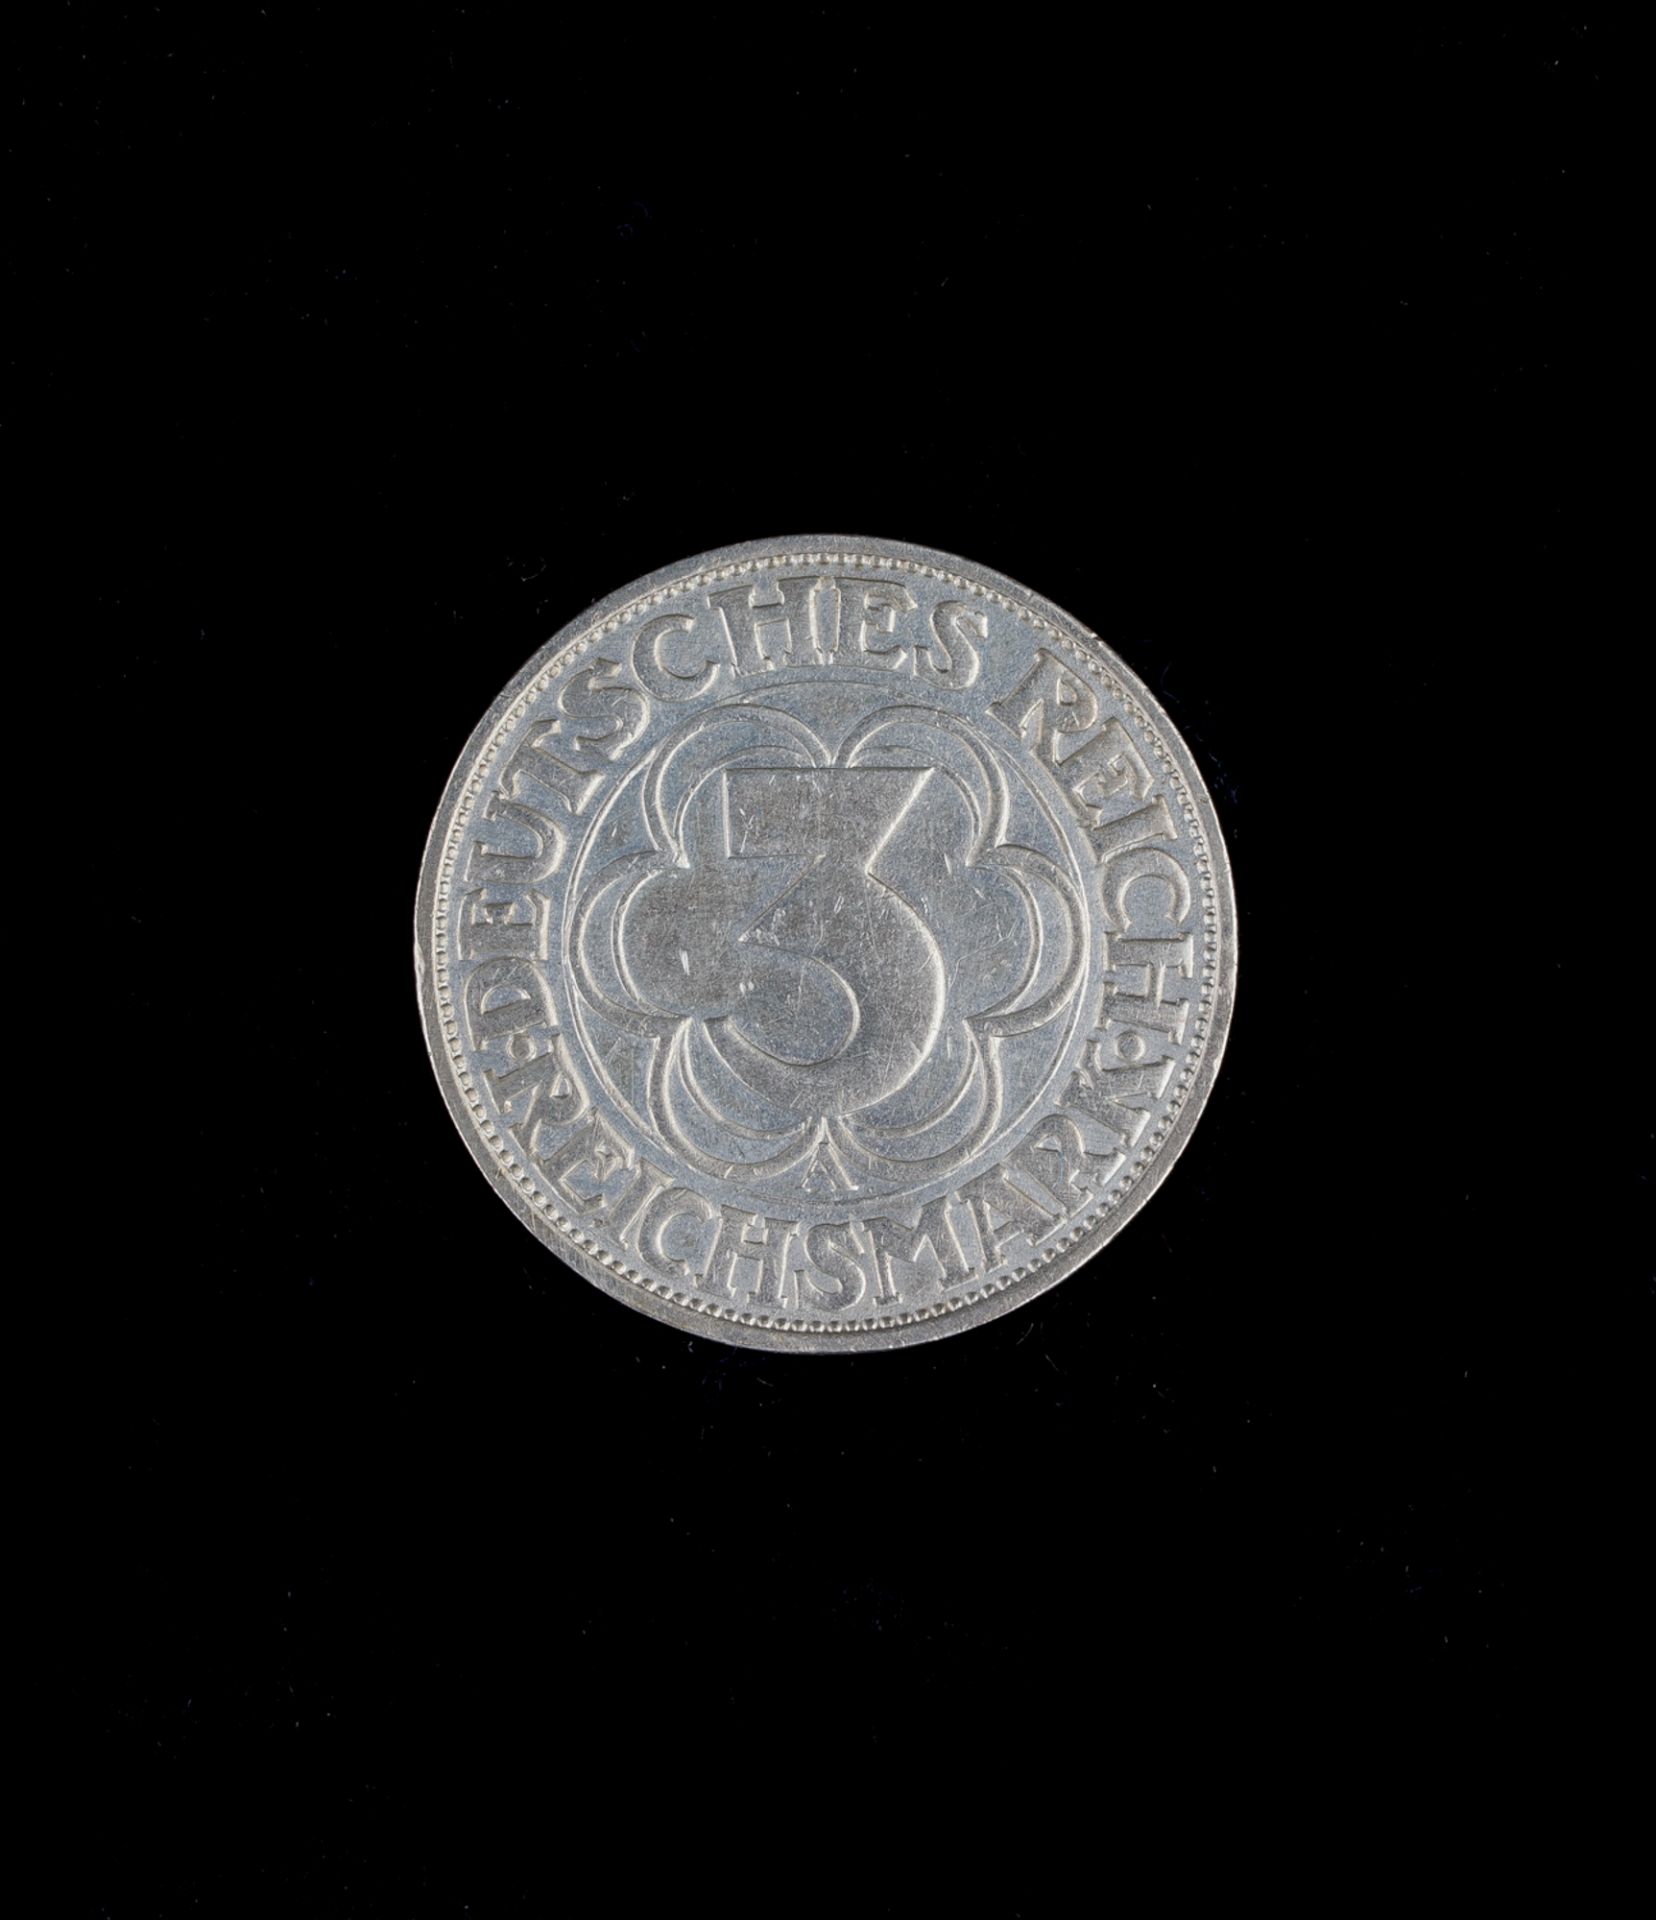 3 Reichsmark, 1927 A - Image 2 of 2